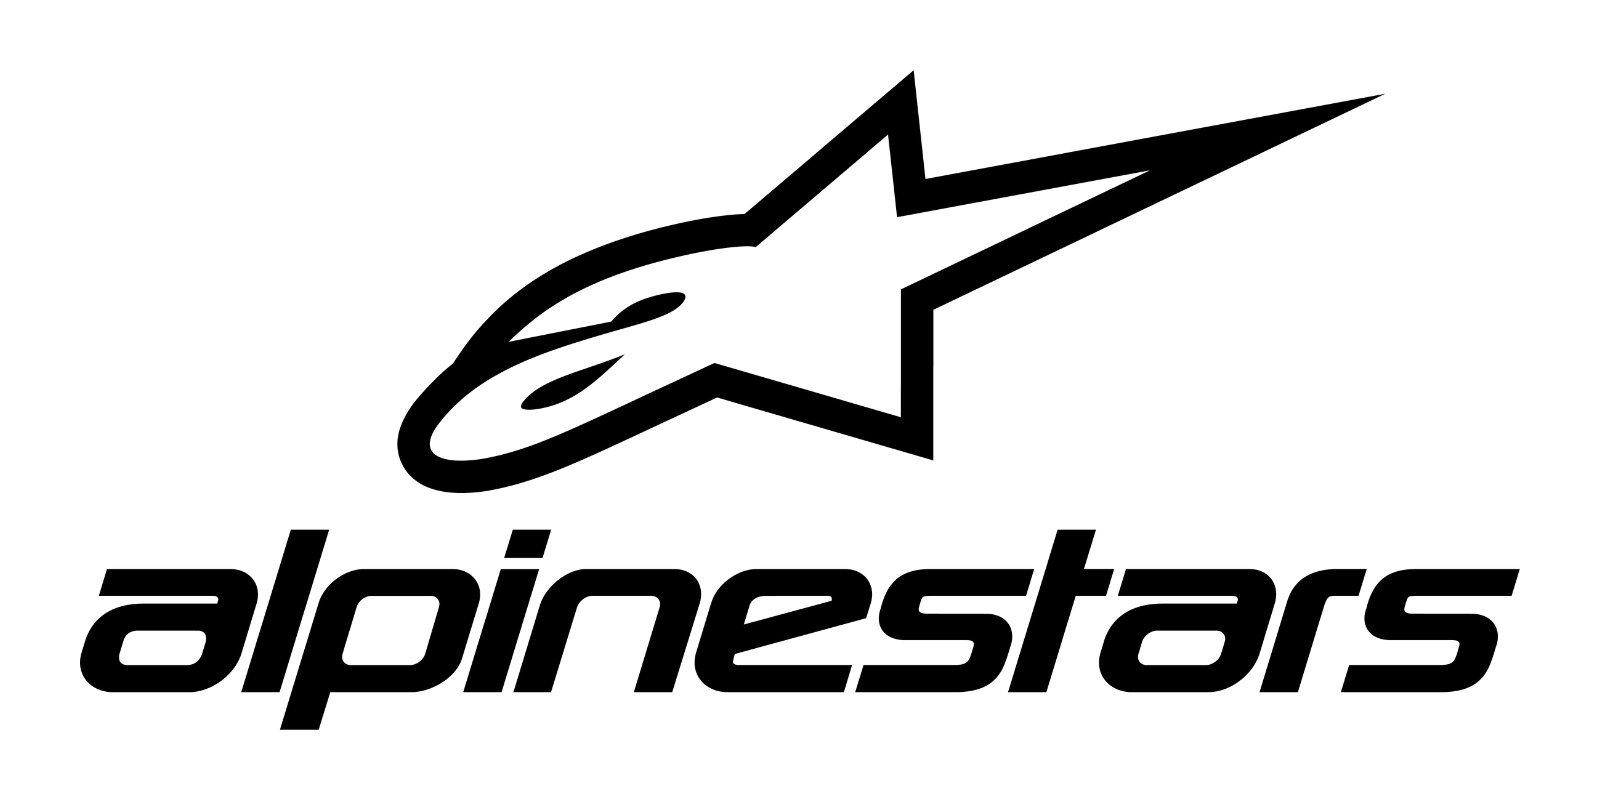 Alpinestars Selects Centric PLM as Backbone for PLM | Centric Software